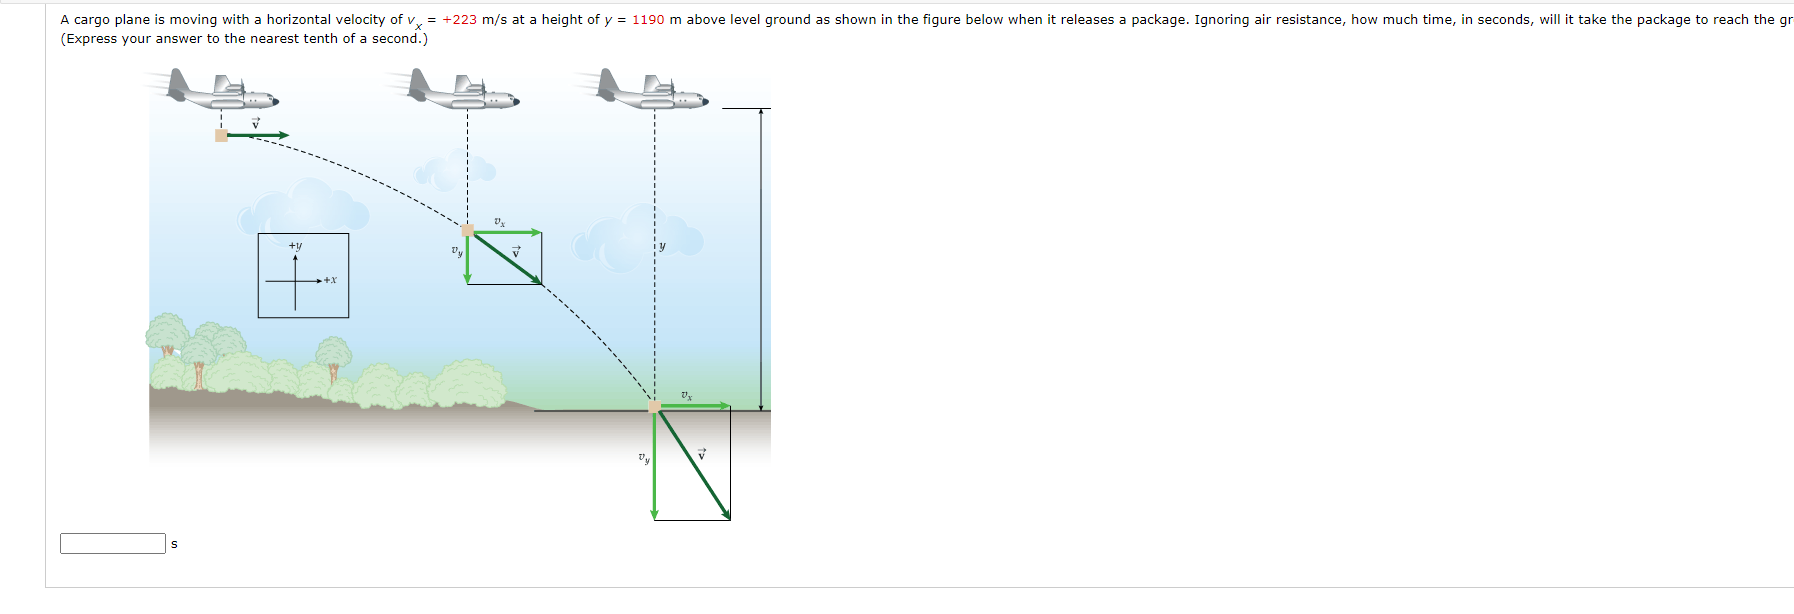 A cargo plane is moving with a horizontal velocity of v. = +223 m/s at a height of y = 1190 m above level ground as shown in the figure below when it releases a package. Ignoring air resistance, how much time, in seconds, will it take the package to reach the g
(Express your answer to the nearest tenth of a second.)
